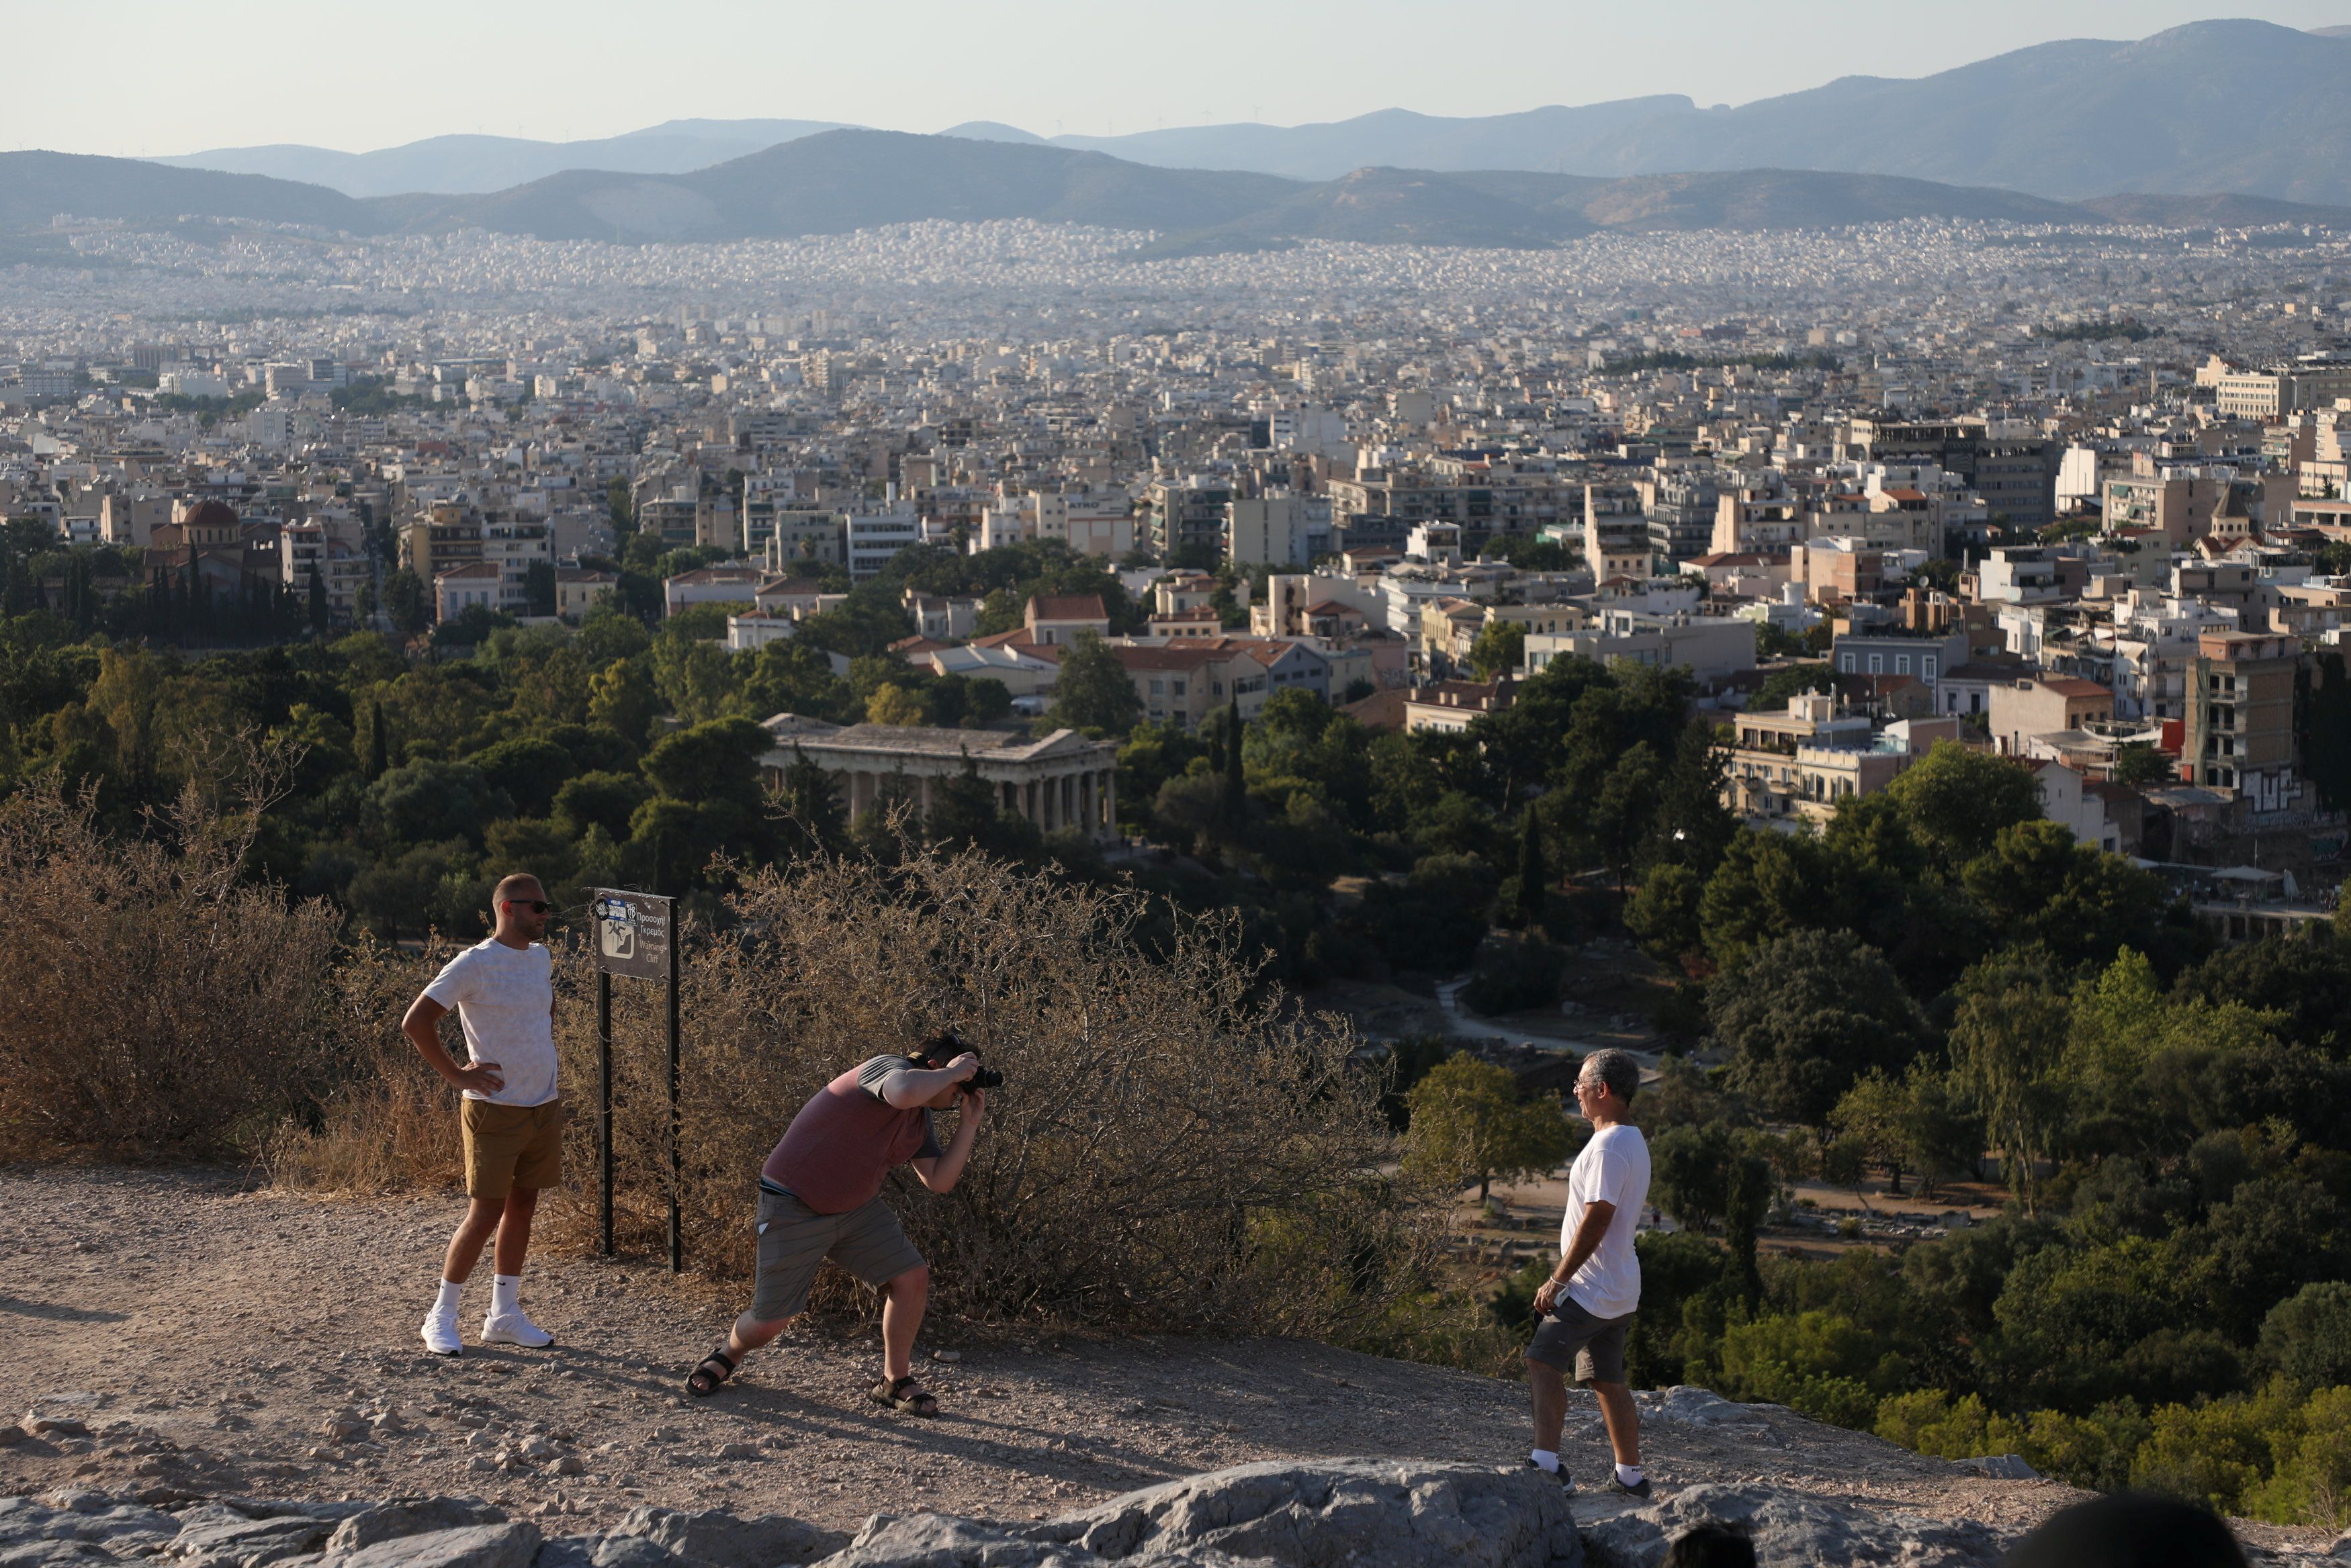 People visit the Areios Pagos hill in Athens